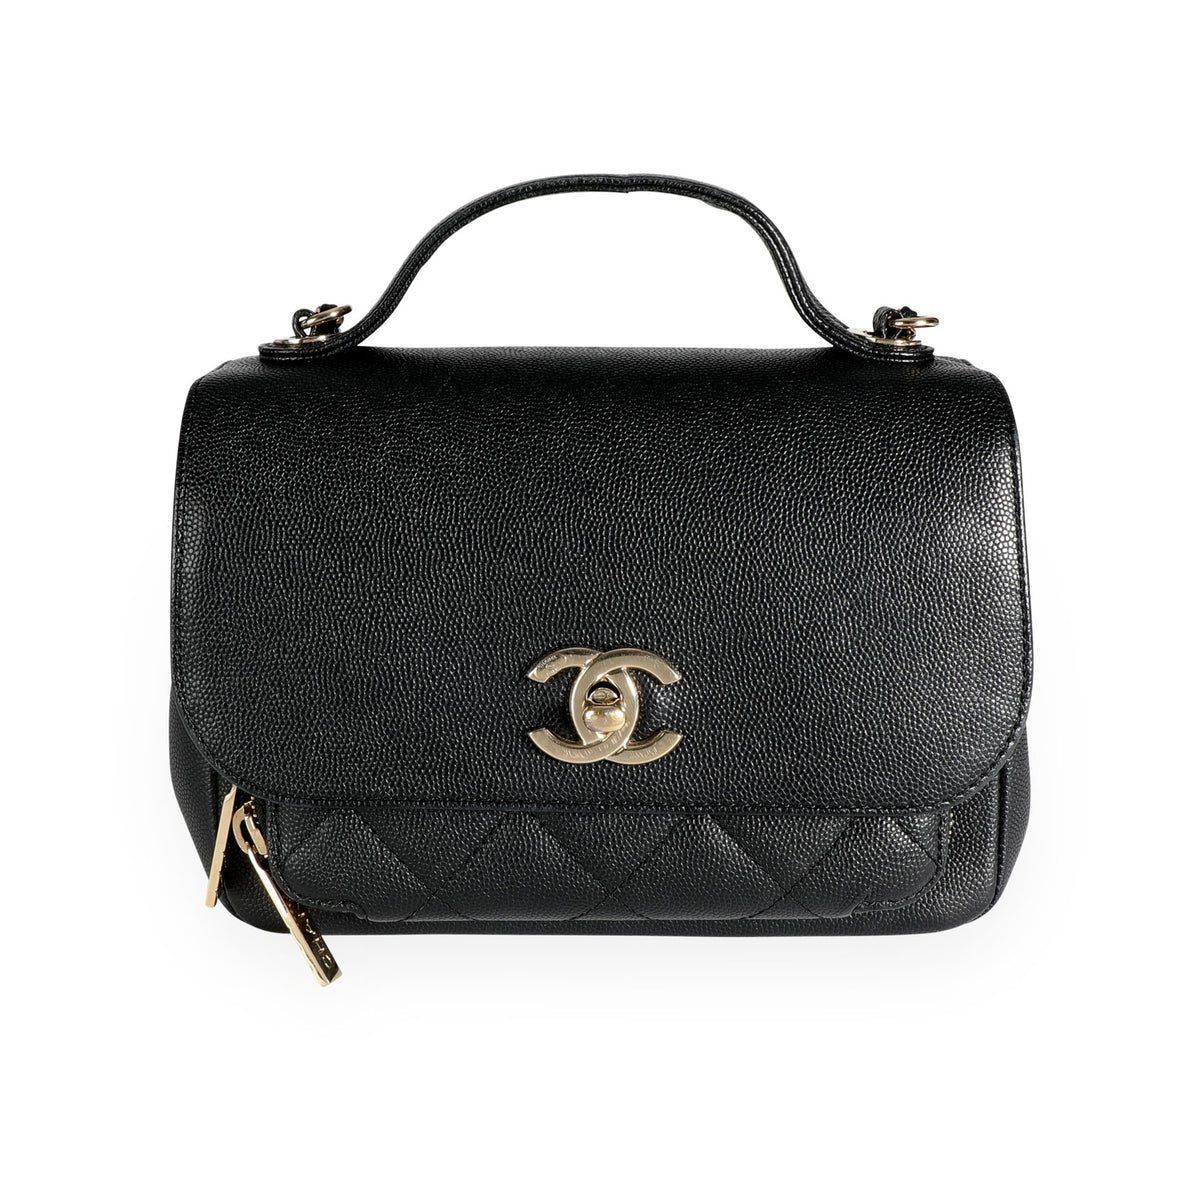 Chanel Small Business Affinity Flap Bag